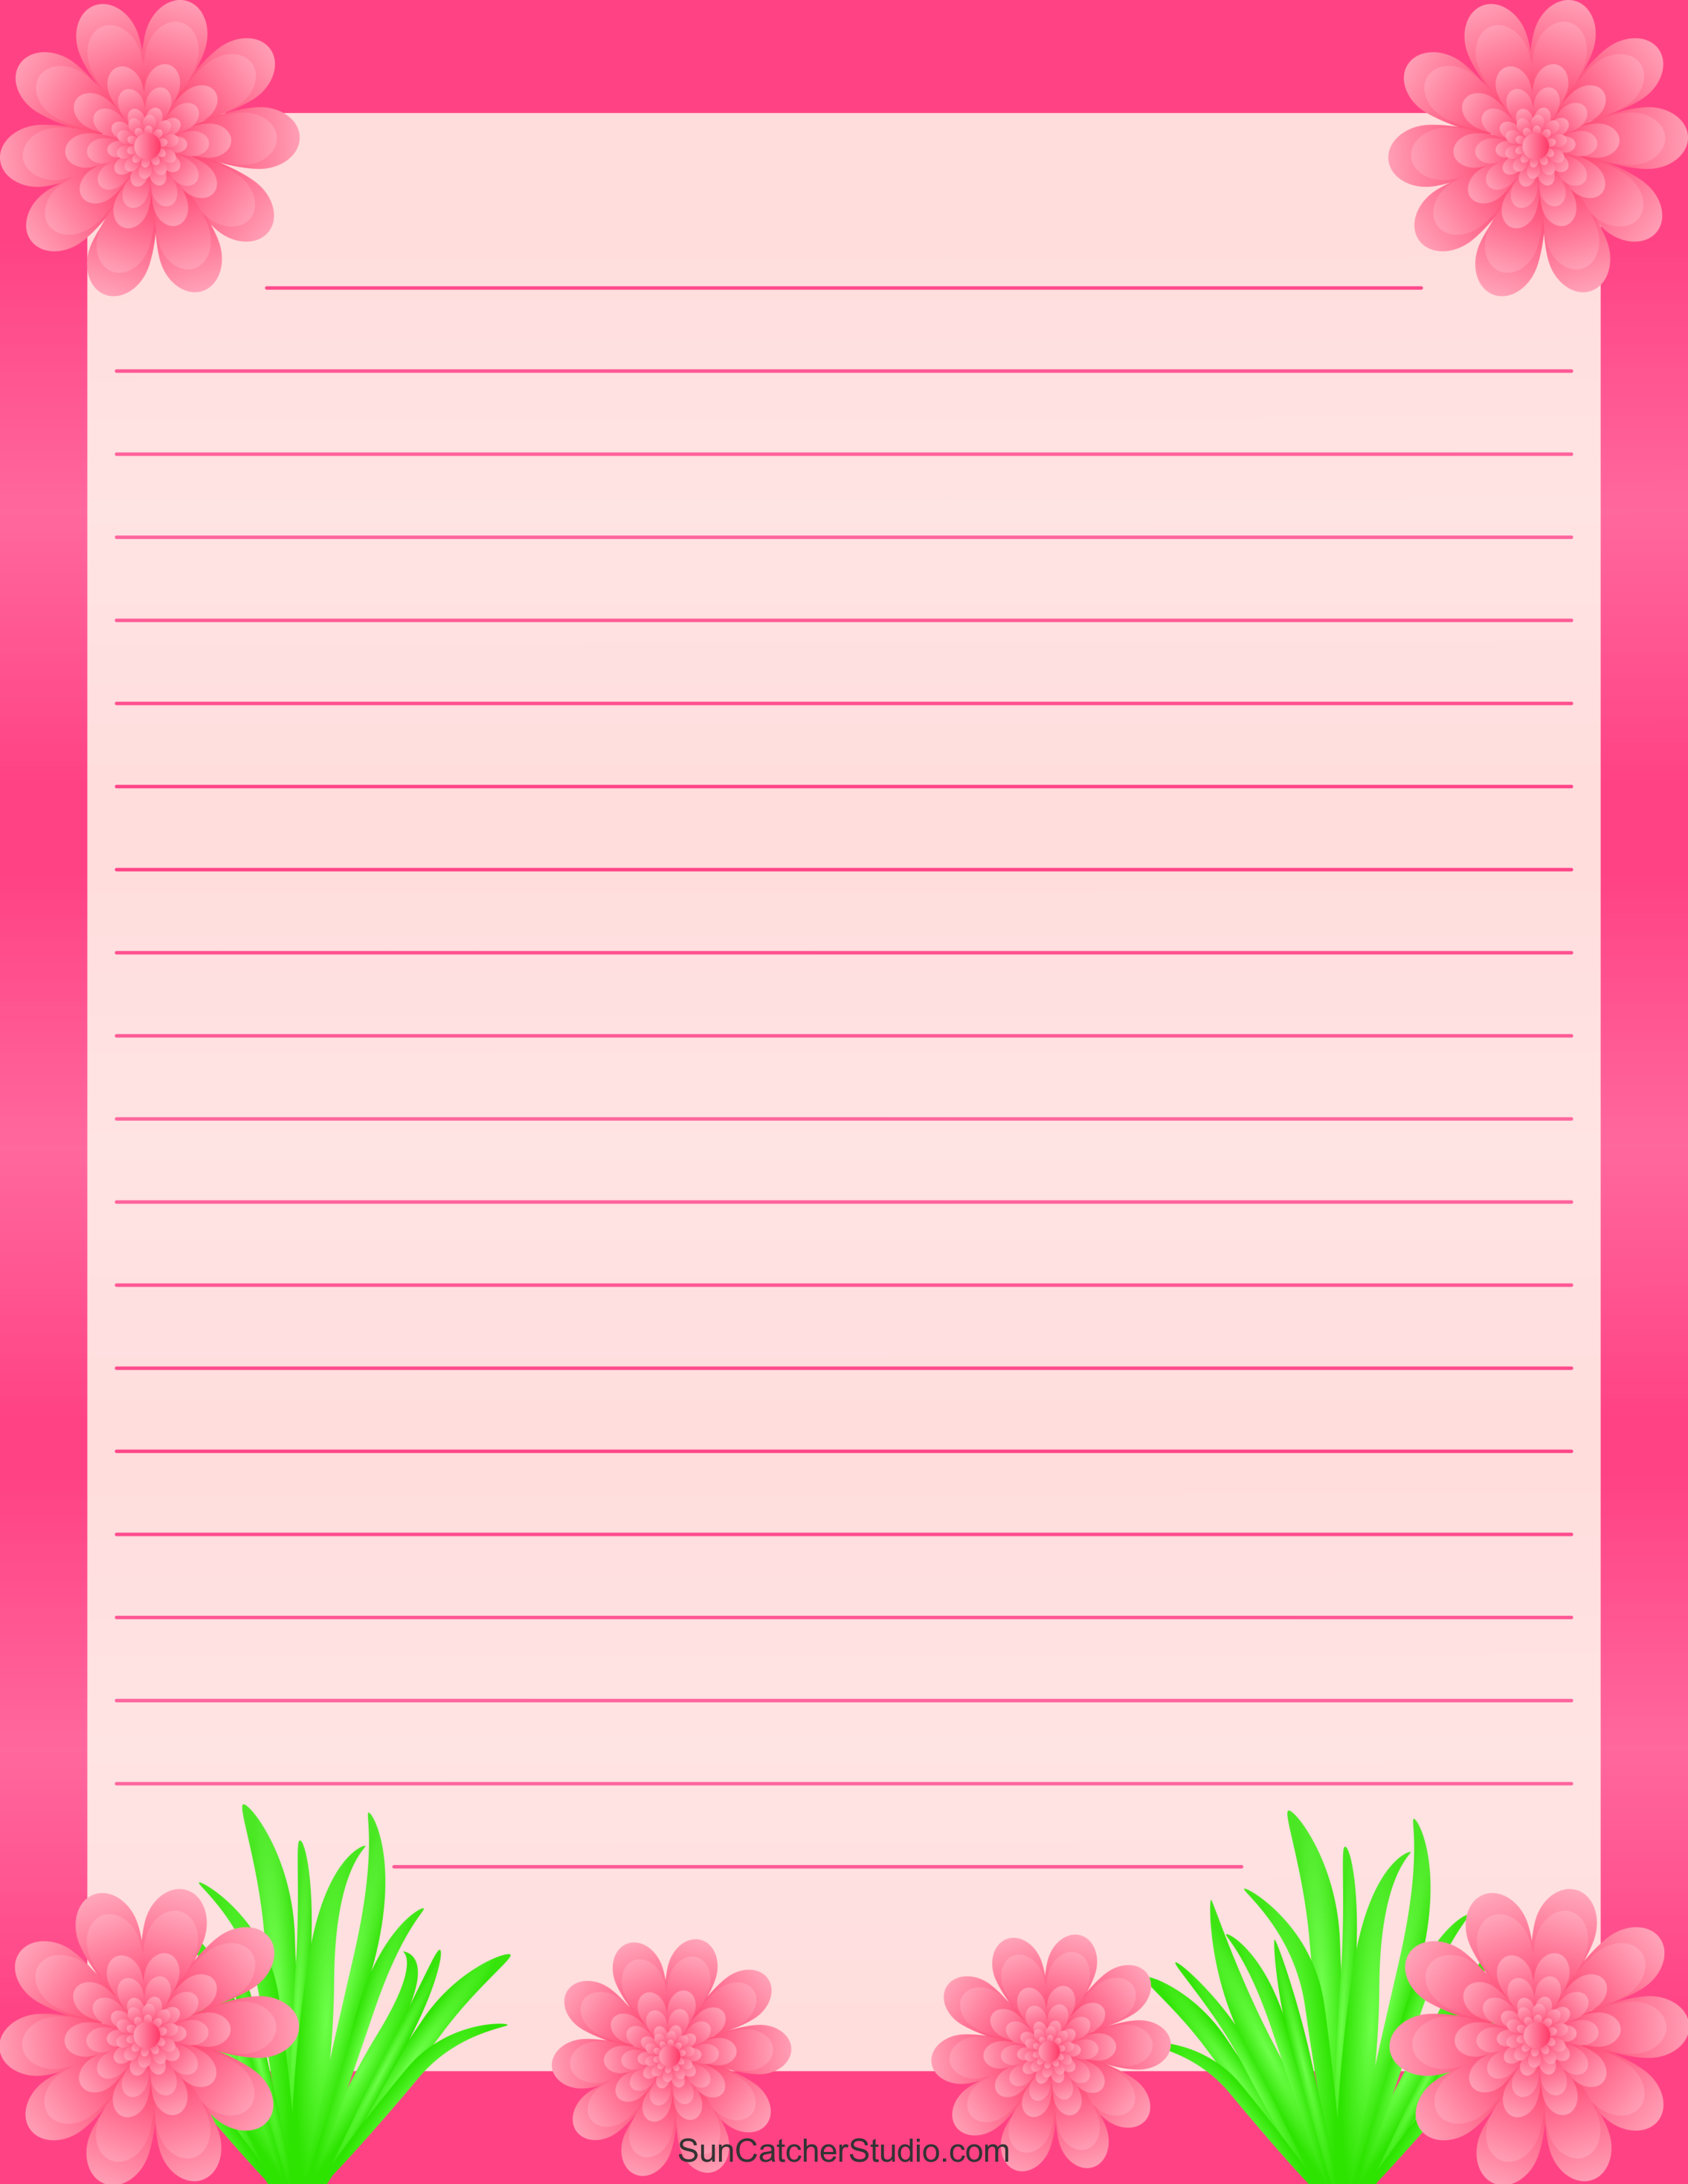 Free printable stationery and lined letter writing paper â diy projects patterns monograms designs templates